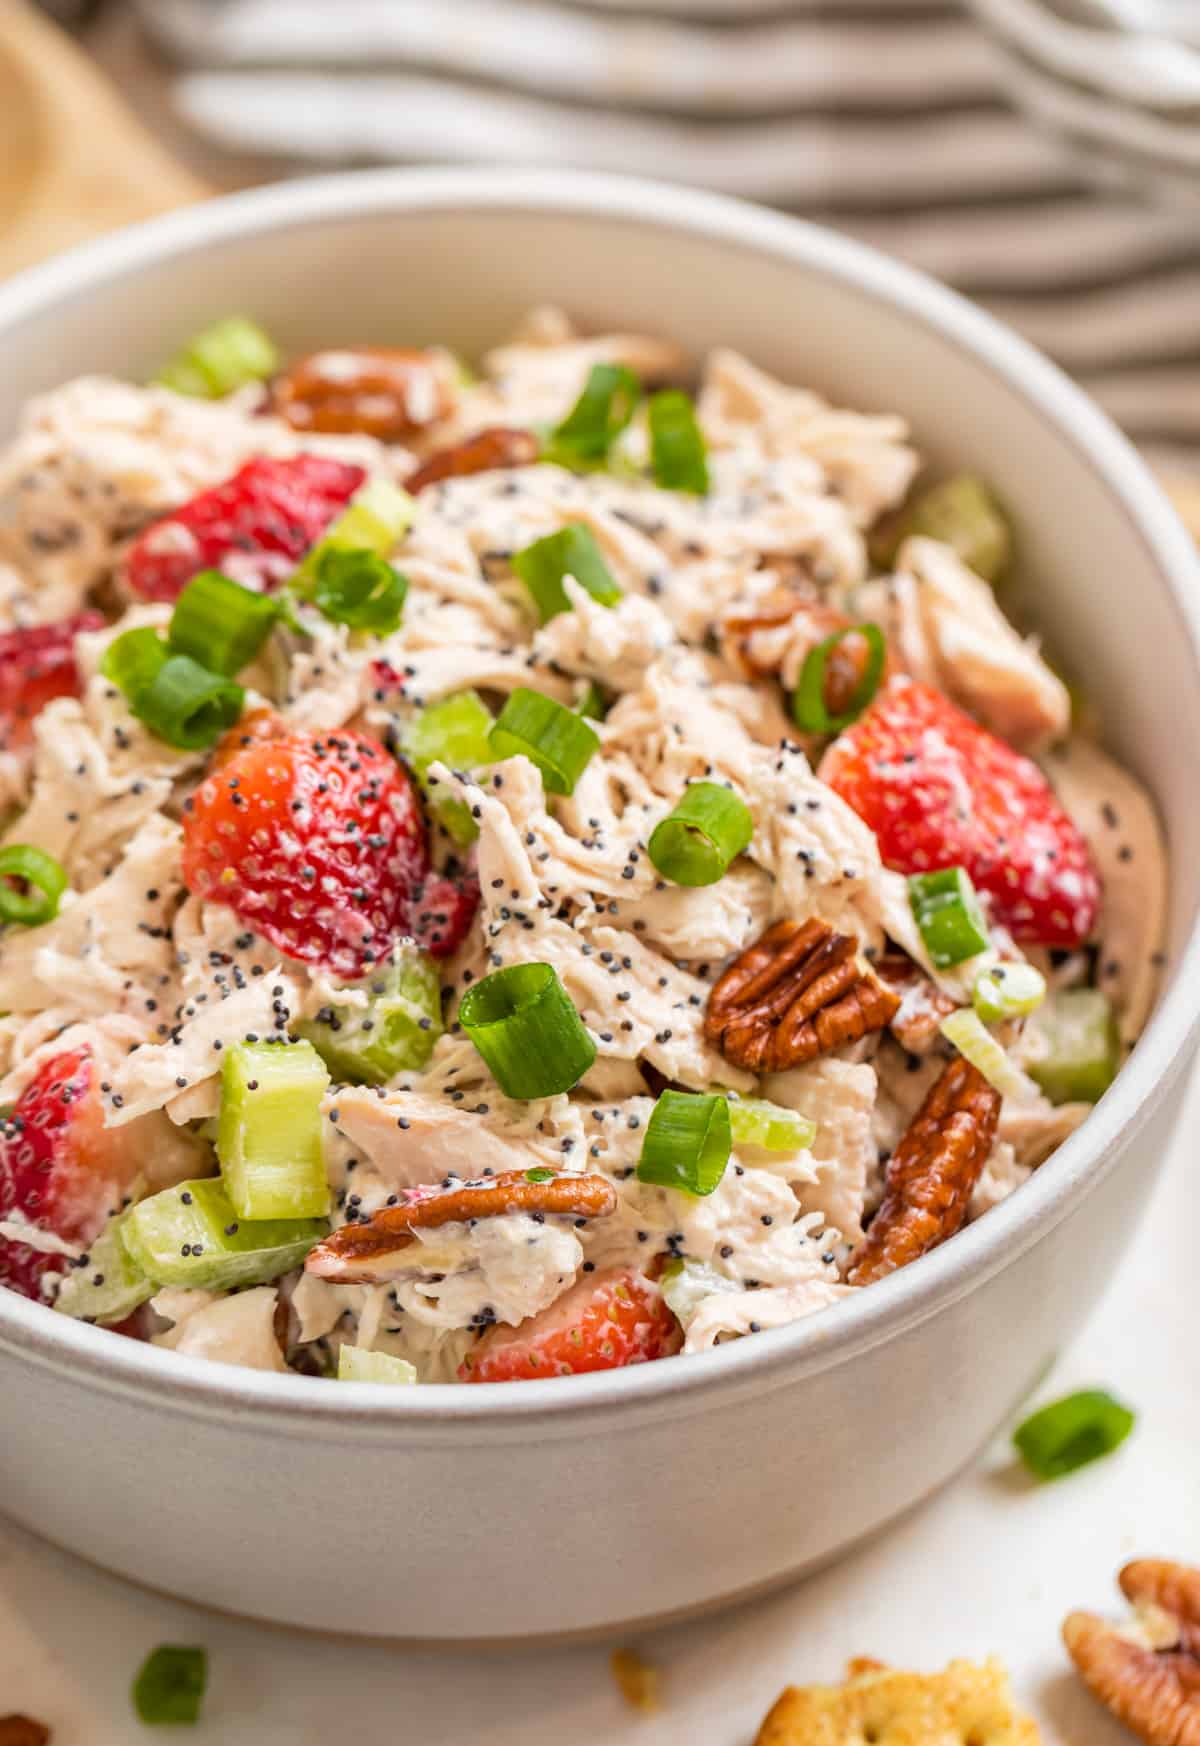 Strawberry chicken salad with pecans, poppy seeds and green onion in ceramic bowl.